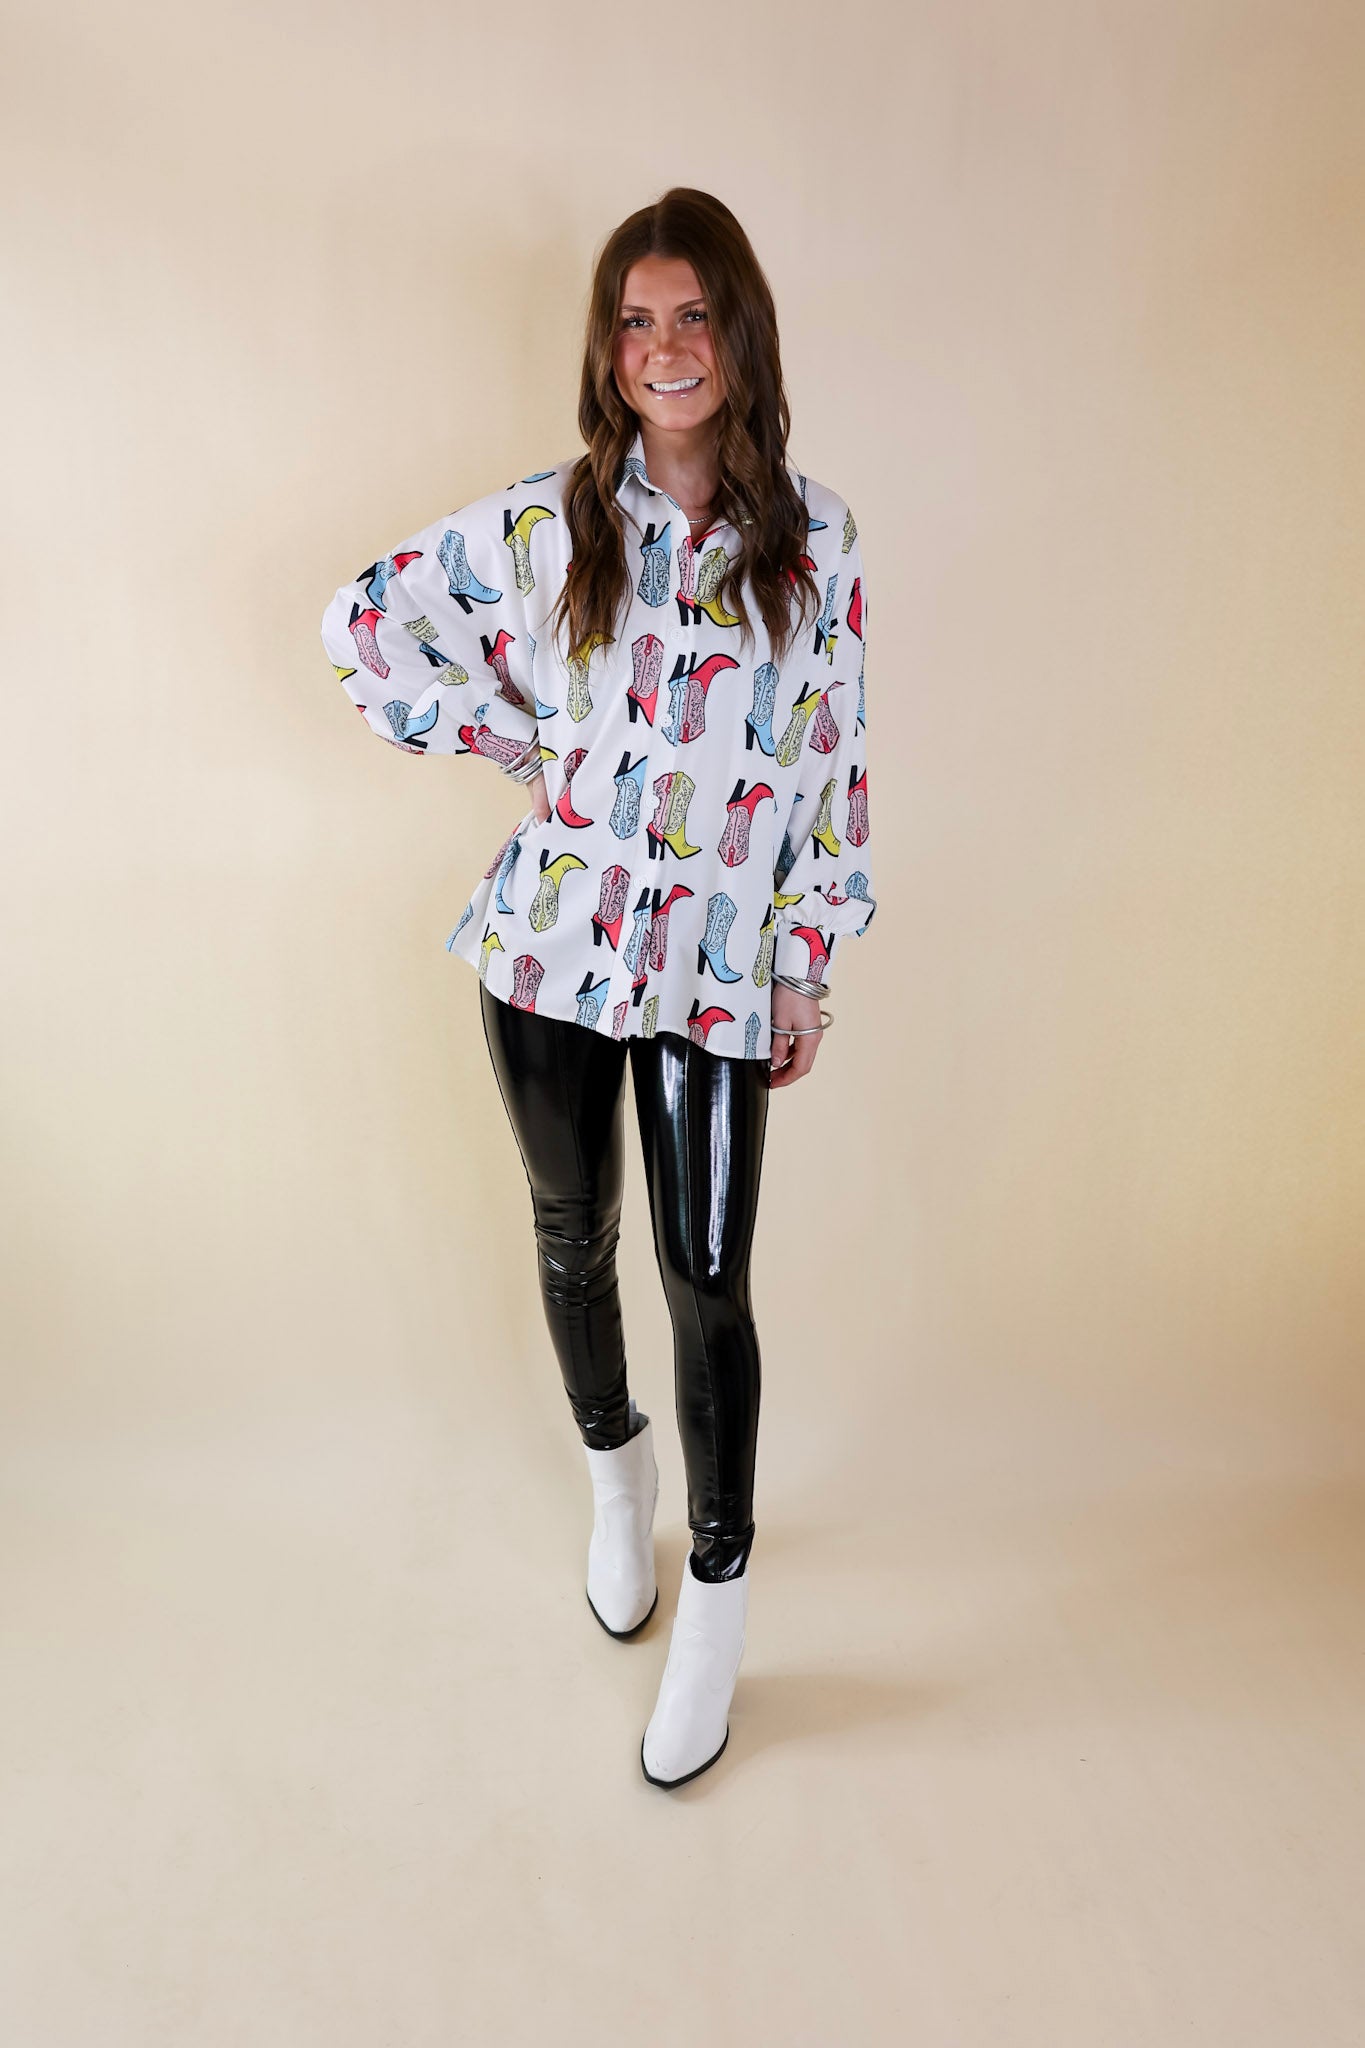 The Cowgirl Way Button Up Multi Color Cowgirl Boot Top in White - Giddy Up Glamour Boutique